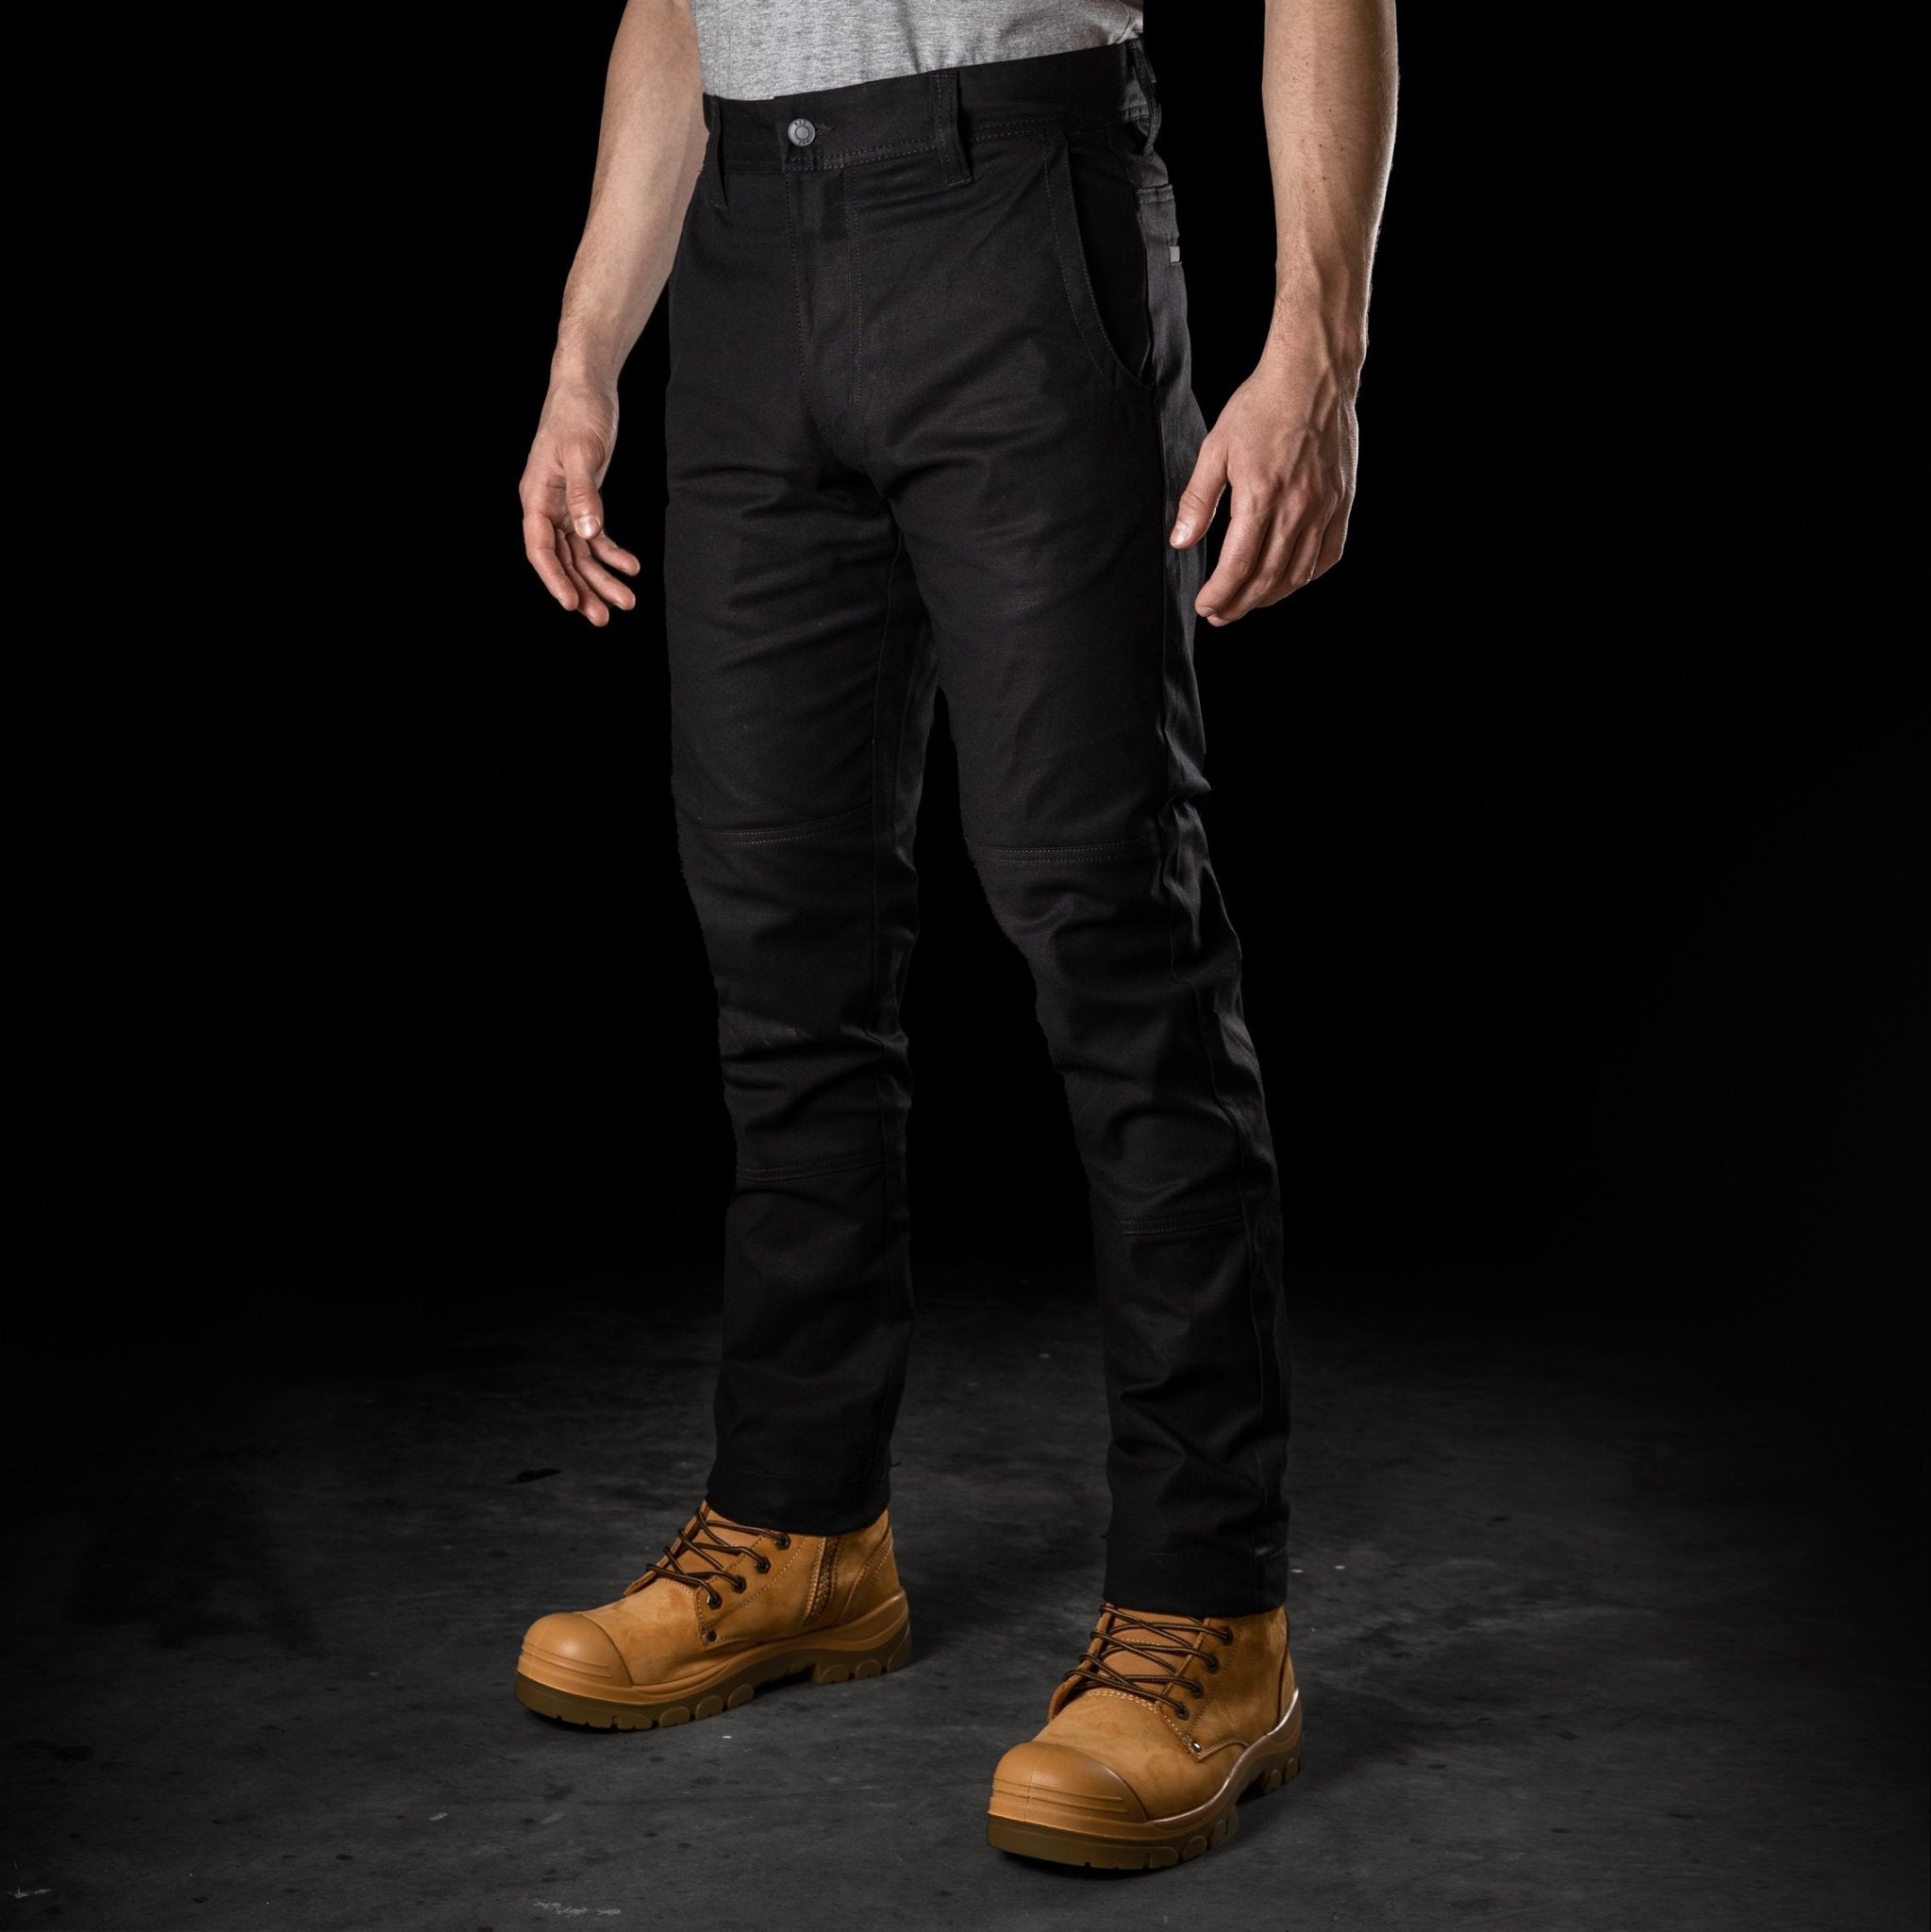 5 Best Work Pants for Construction Workers in 2023 - Clever Handymen